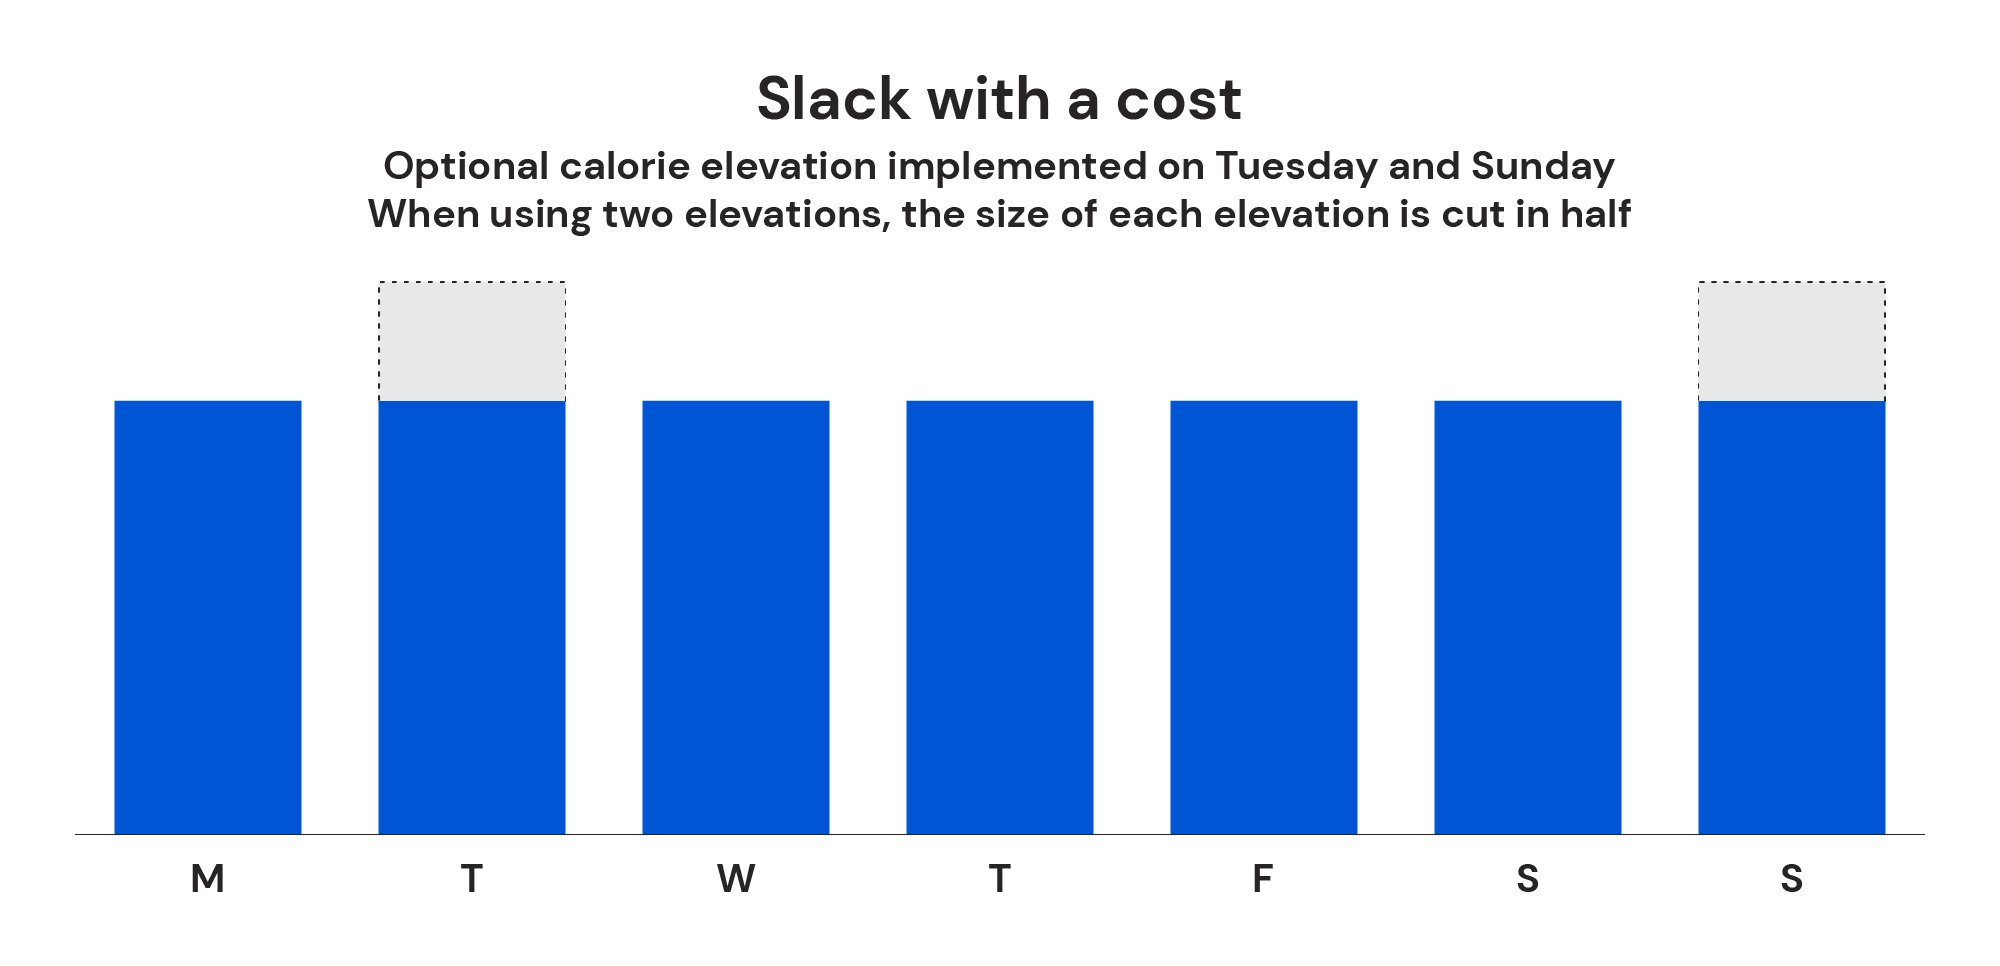 An example of “slack with a cost” implementation, in which the dieter consumes half of their entire calorie reserve on Tuesday, and the other half on Sunday.